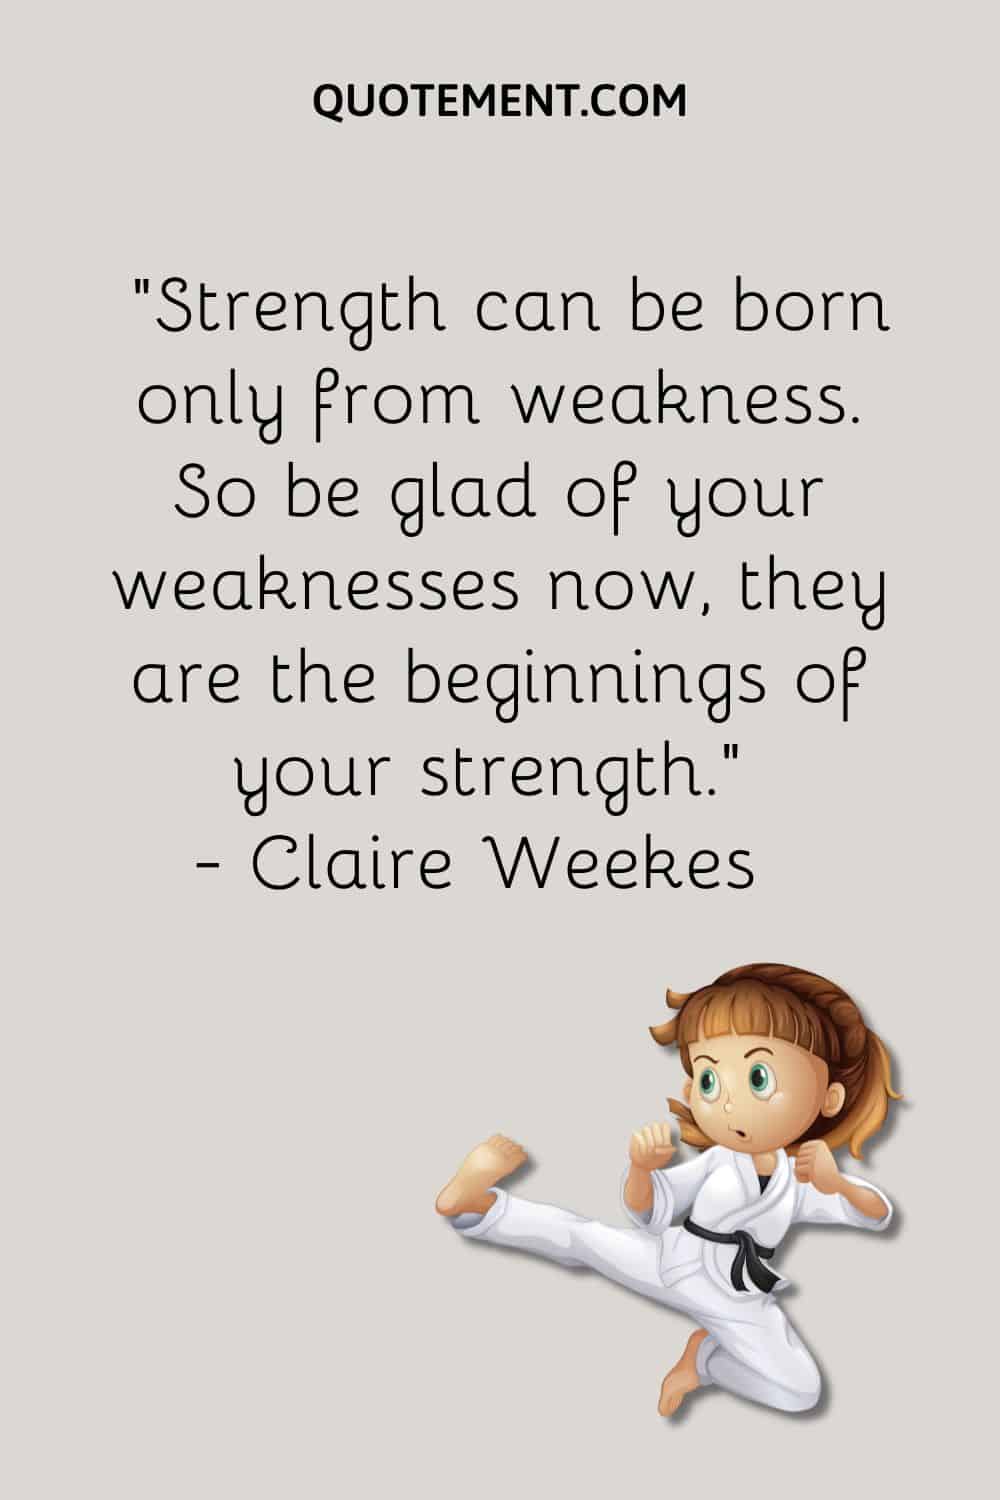 Strength can be born only from weakness